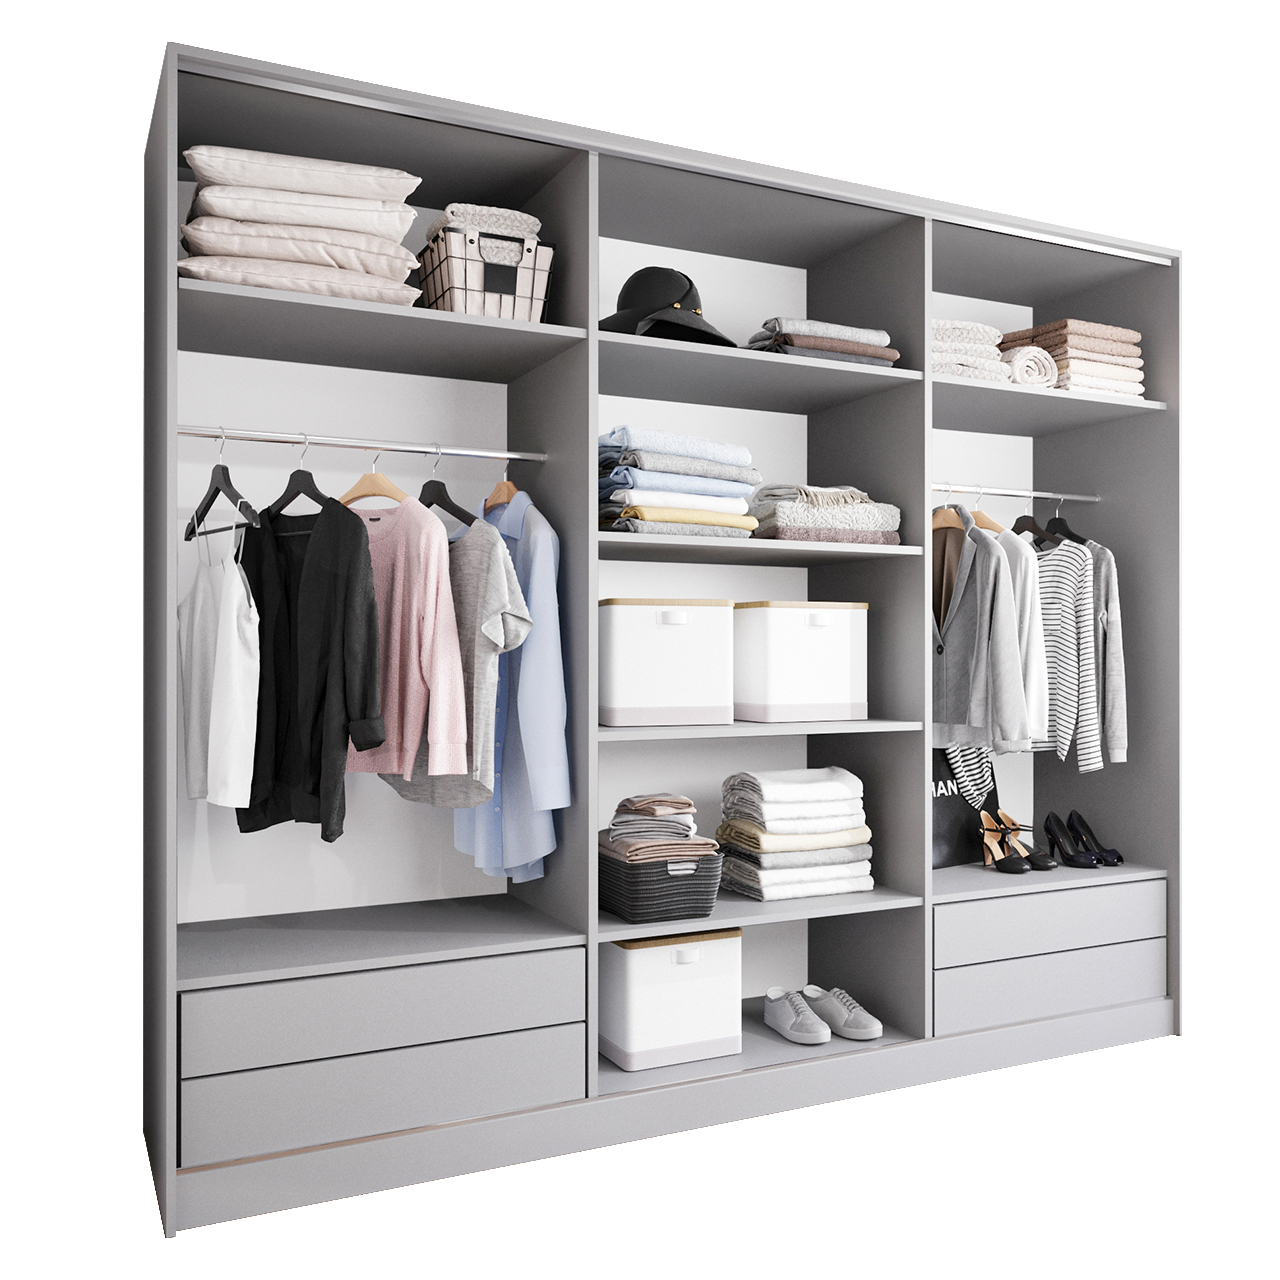 Sliding Wardrobe with Drawers BRITTO D 270 grey